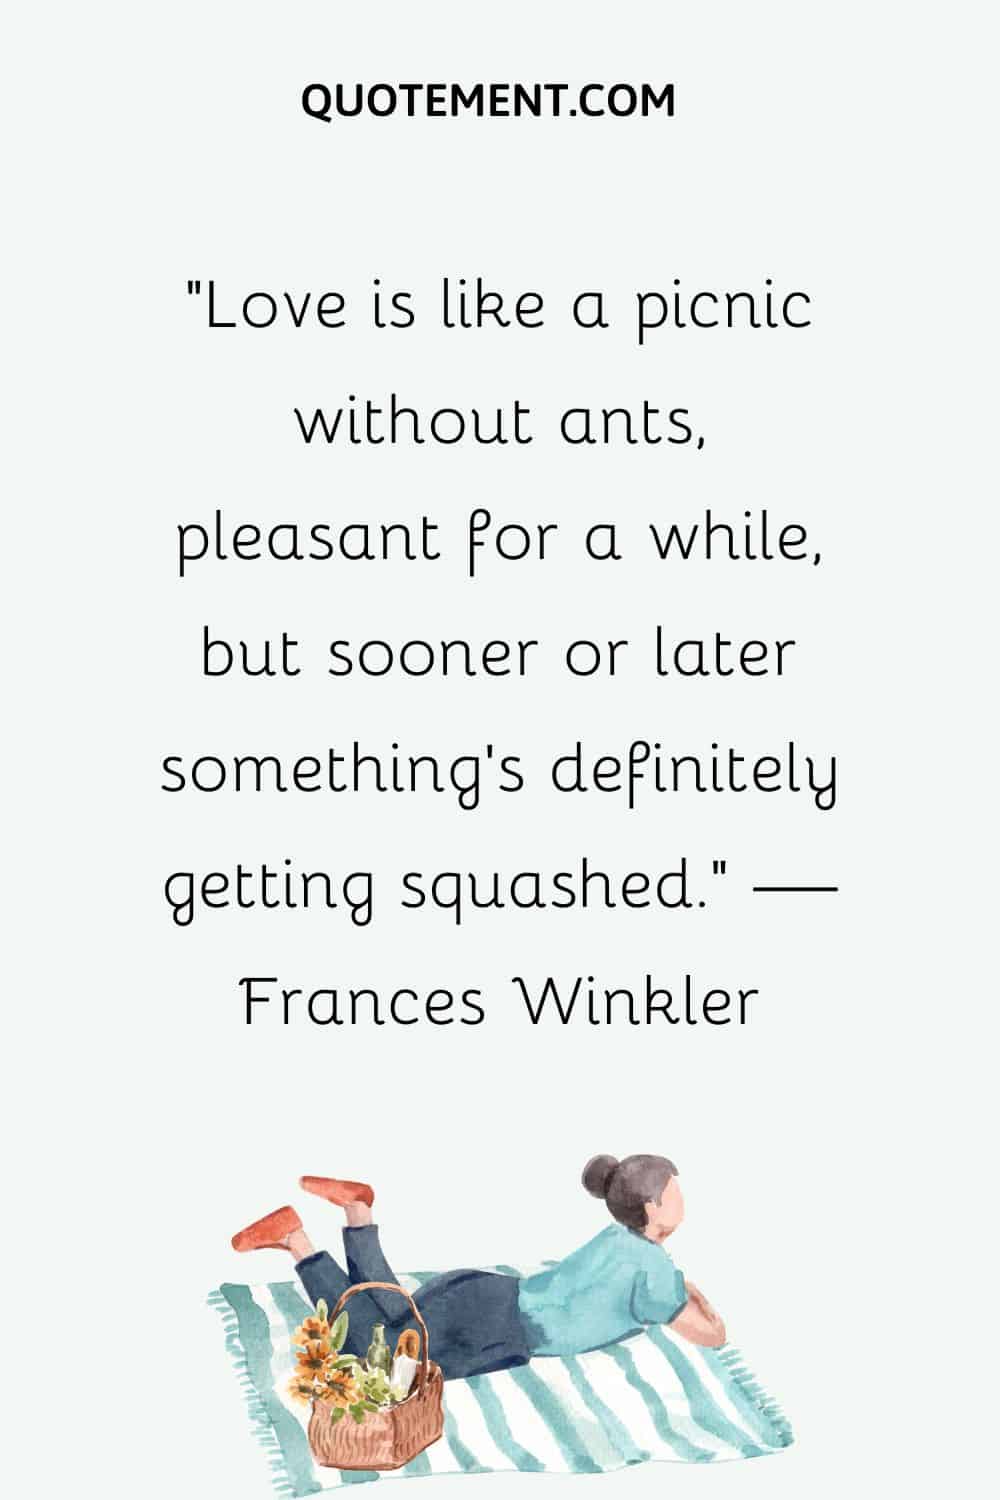 Love is like a picnic without ants